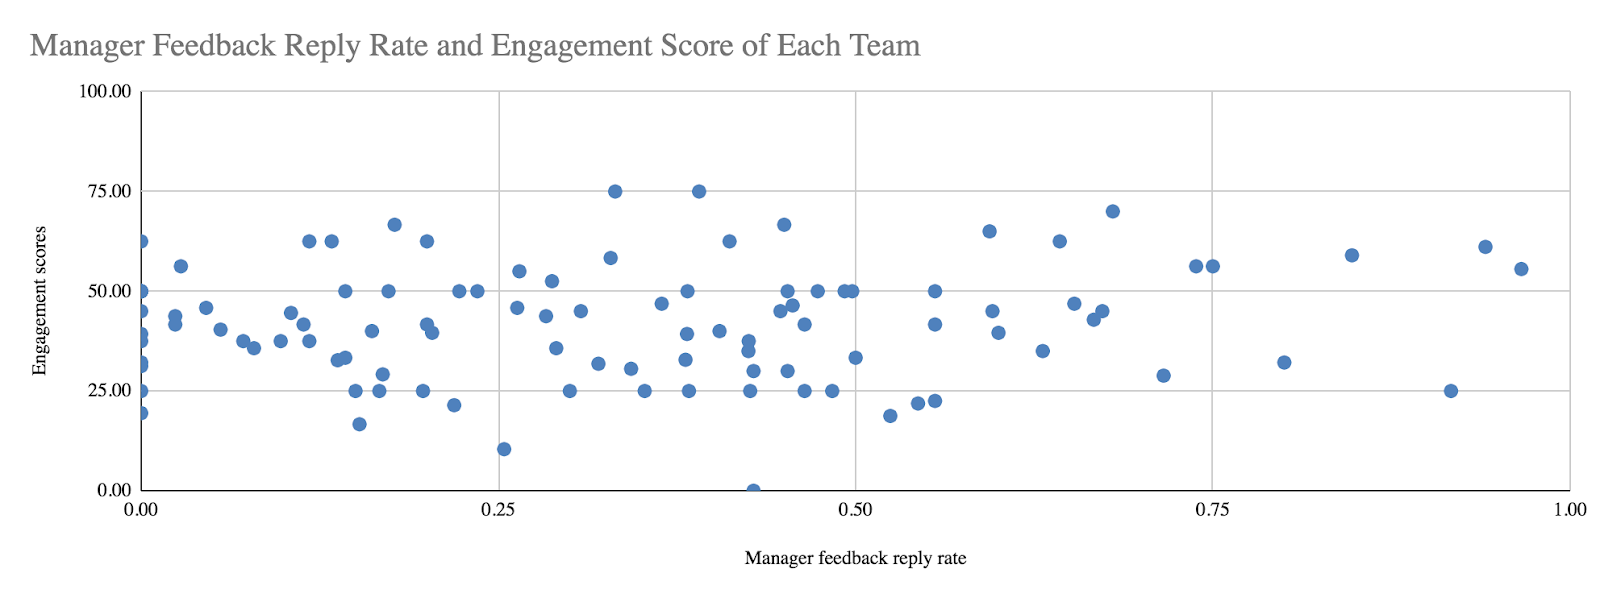 Feedback Reply Rate and Engagement Score of each Team